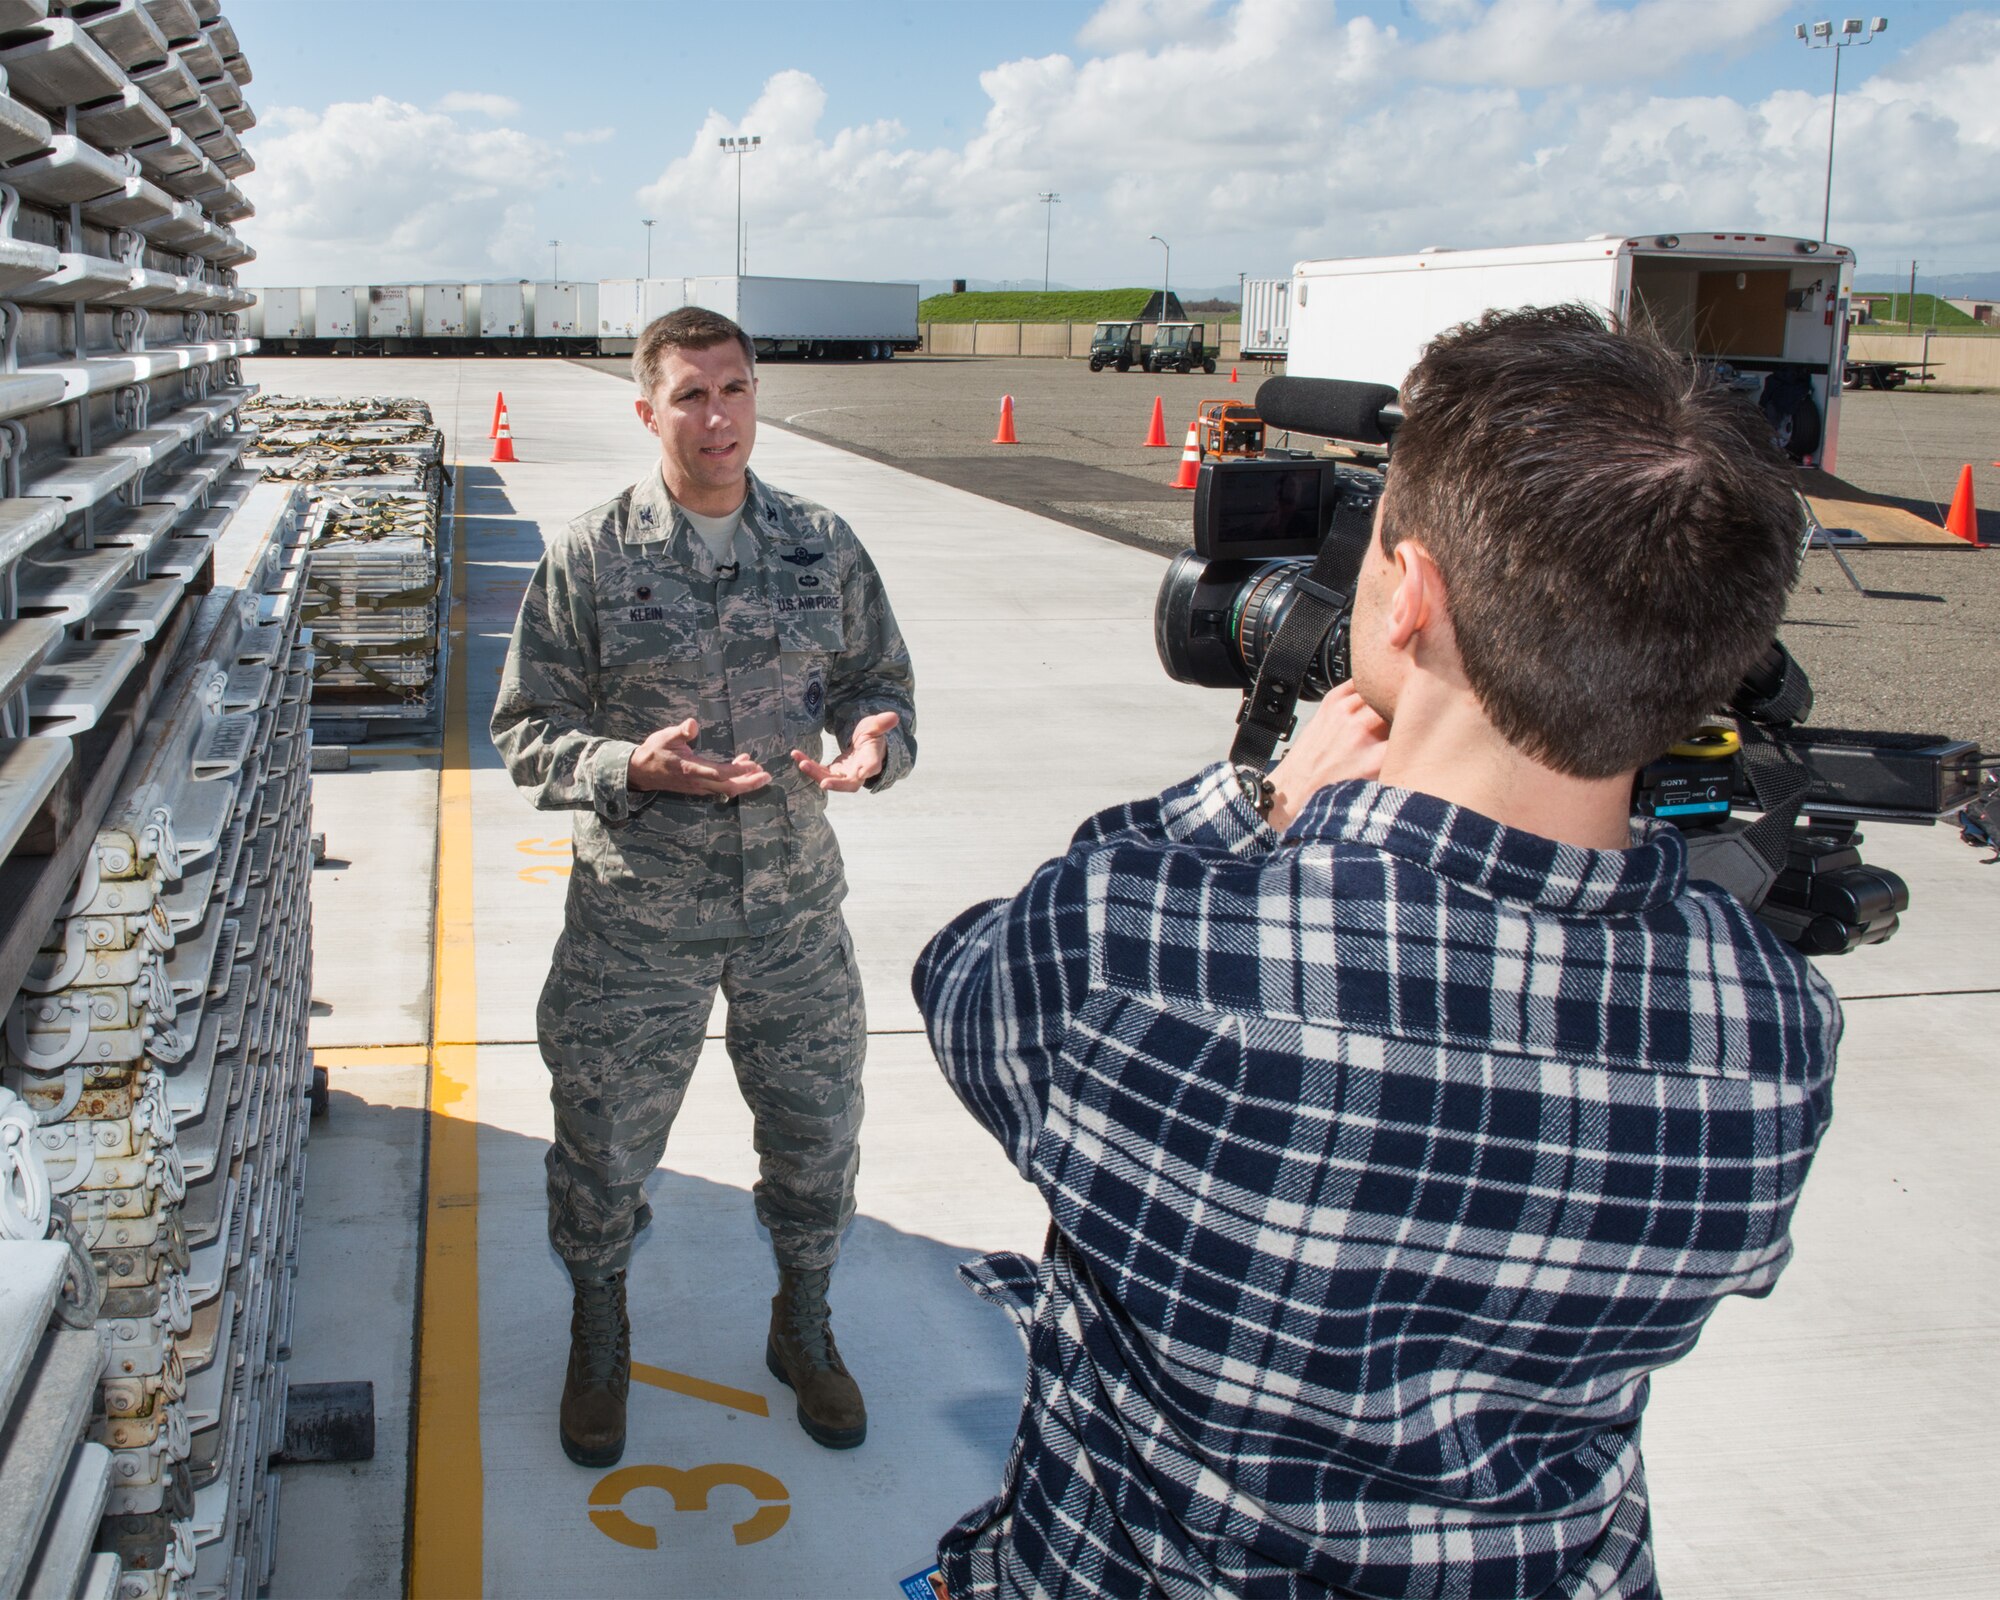 U.S. Air Force Col. John Klein, 60th Air Mobility Wing commander, conducts an interview with local media at Travis Air Force Base, Calif., Feb. 16, 2017. Travis AFB is acting as a staging area for FEMA personnel, providing space for necessary equipment and supplies in case of the Oroville auxiliary spillway failure. (U.S. Air Force photo/Louis Briscese)